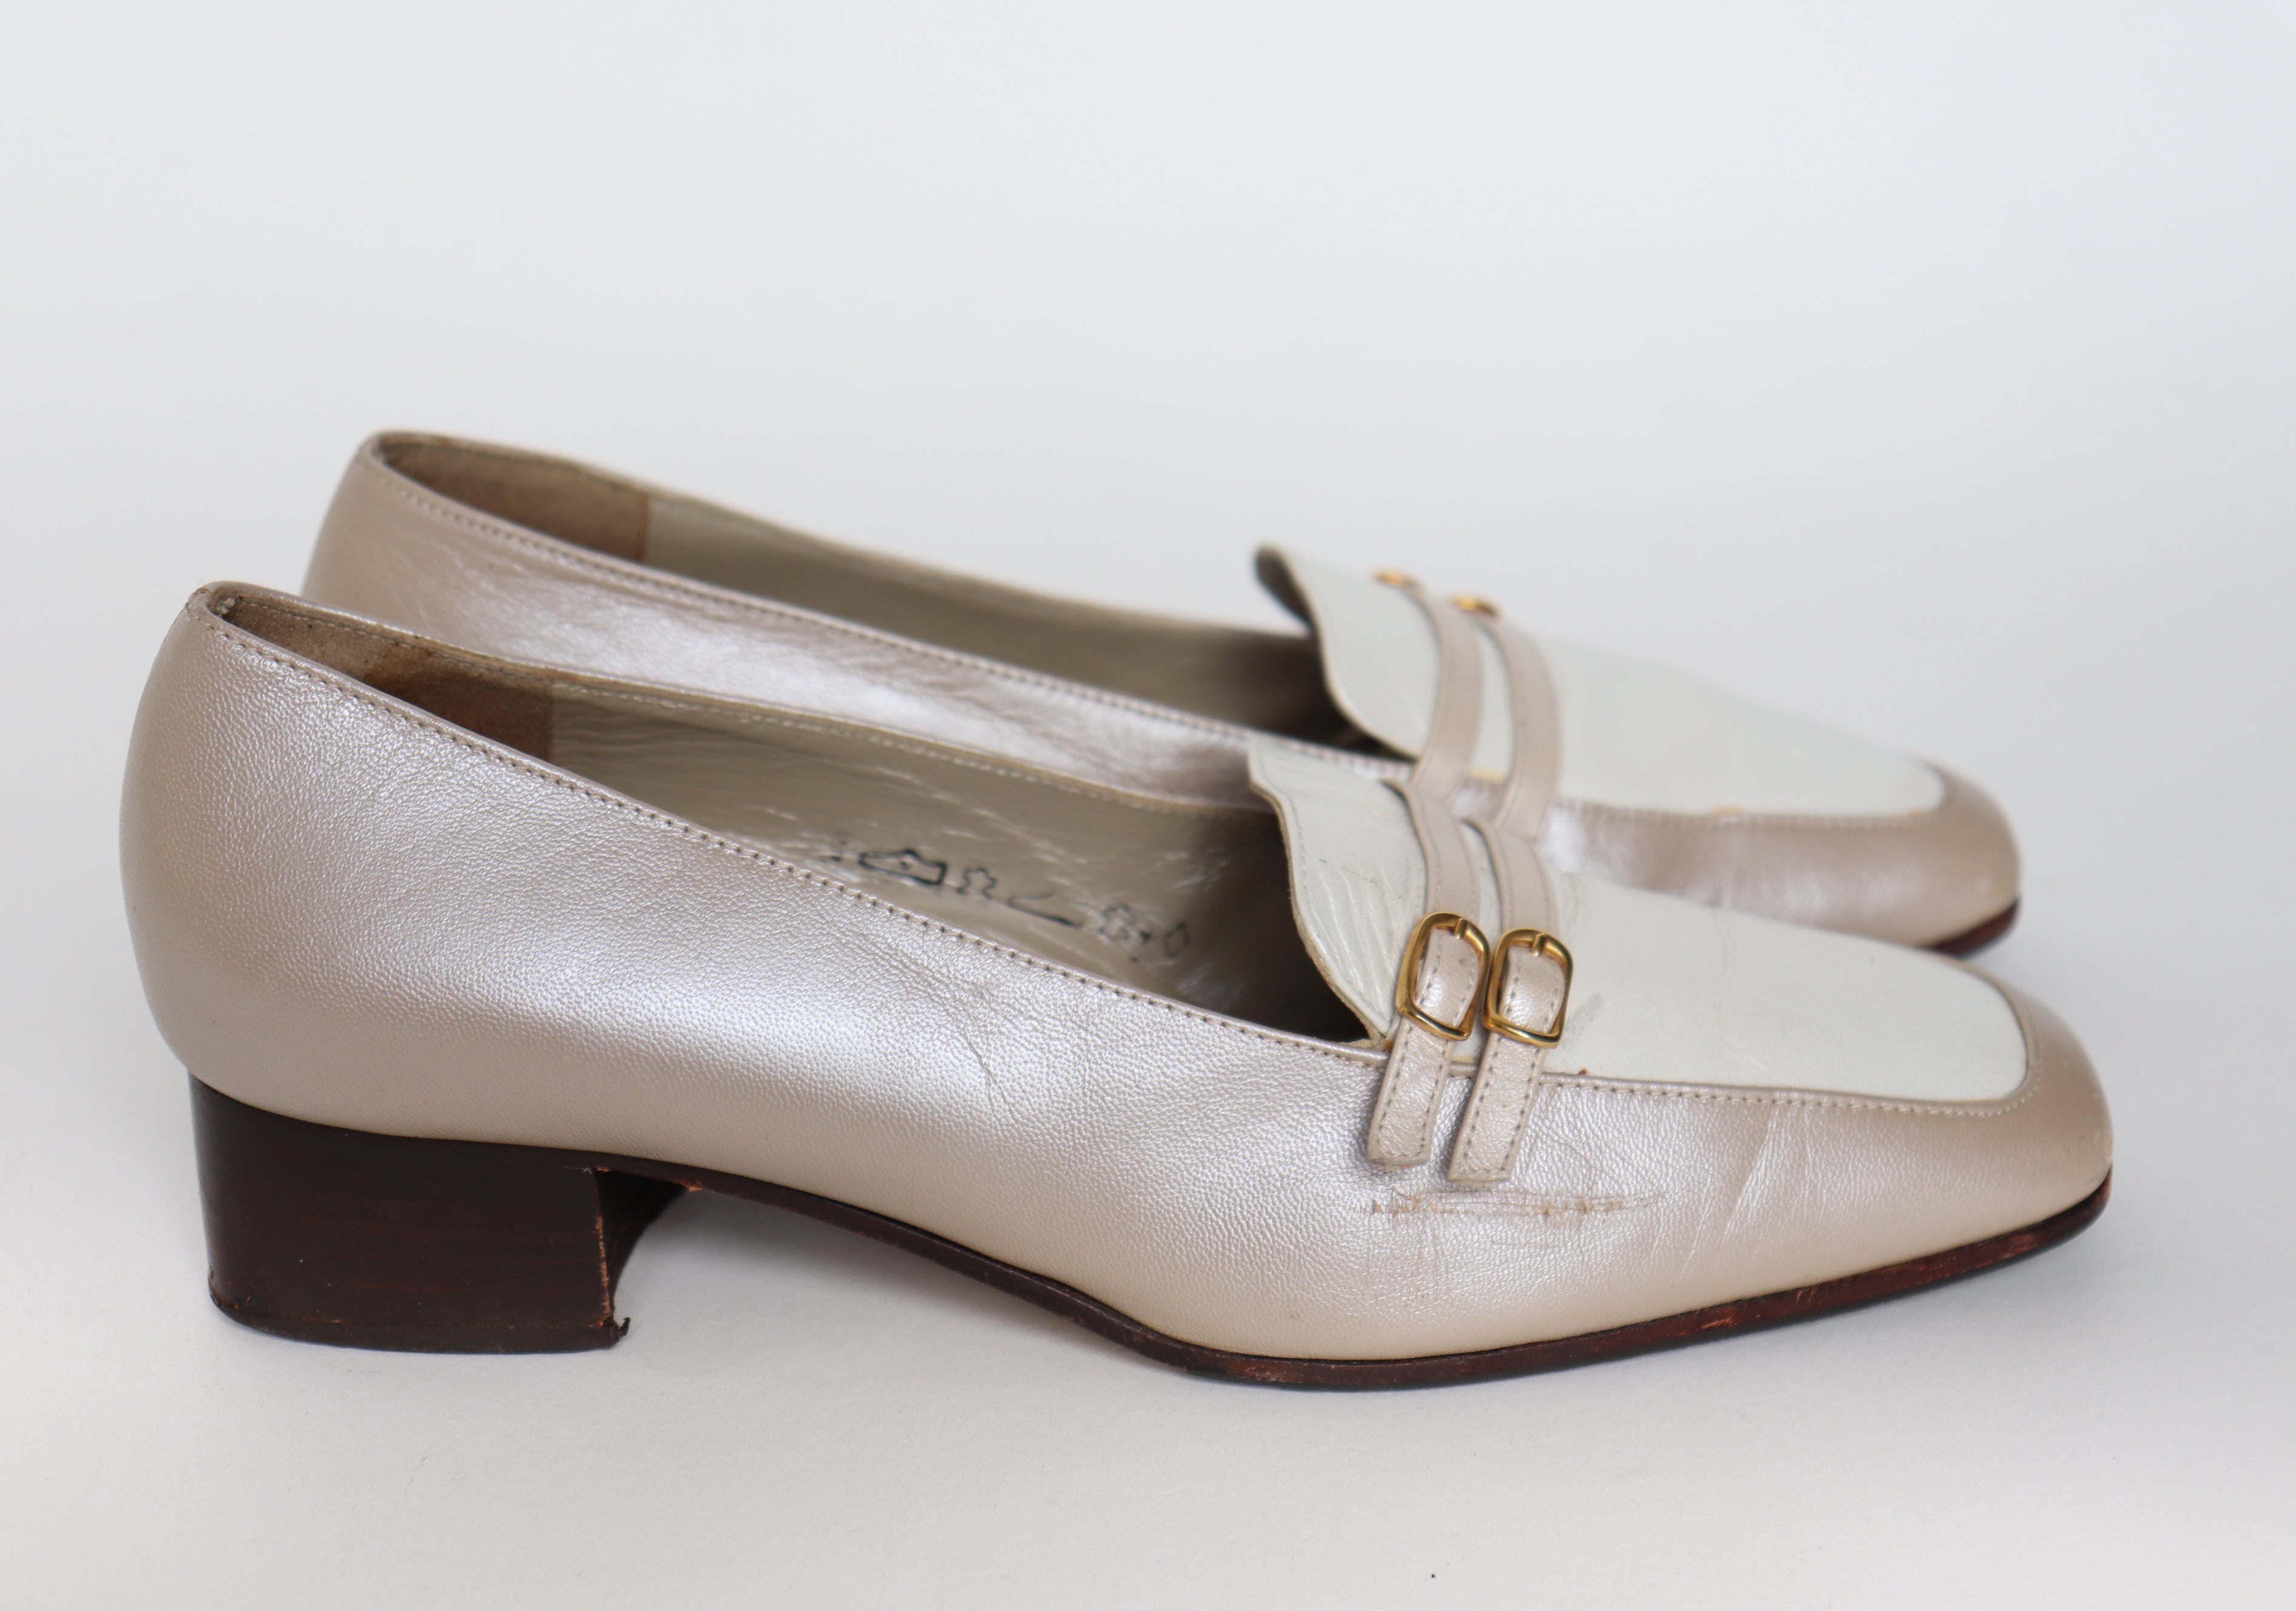 Vintage Heel Loafers - Beige / White  Leather - Fit Wide 37.5 /  38